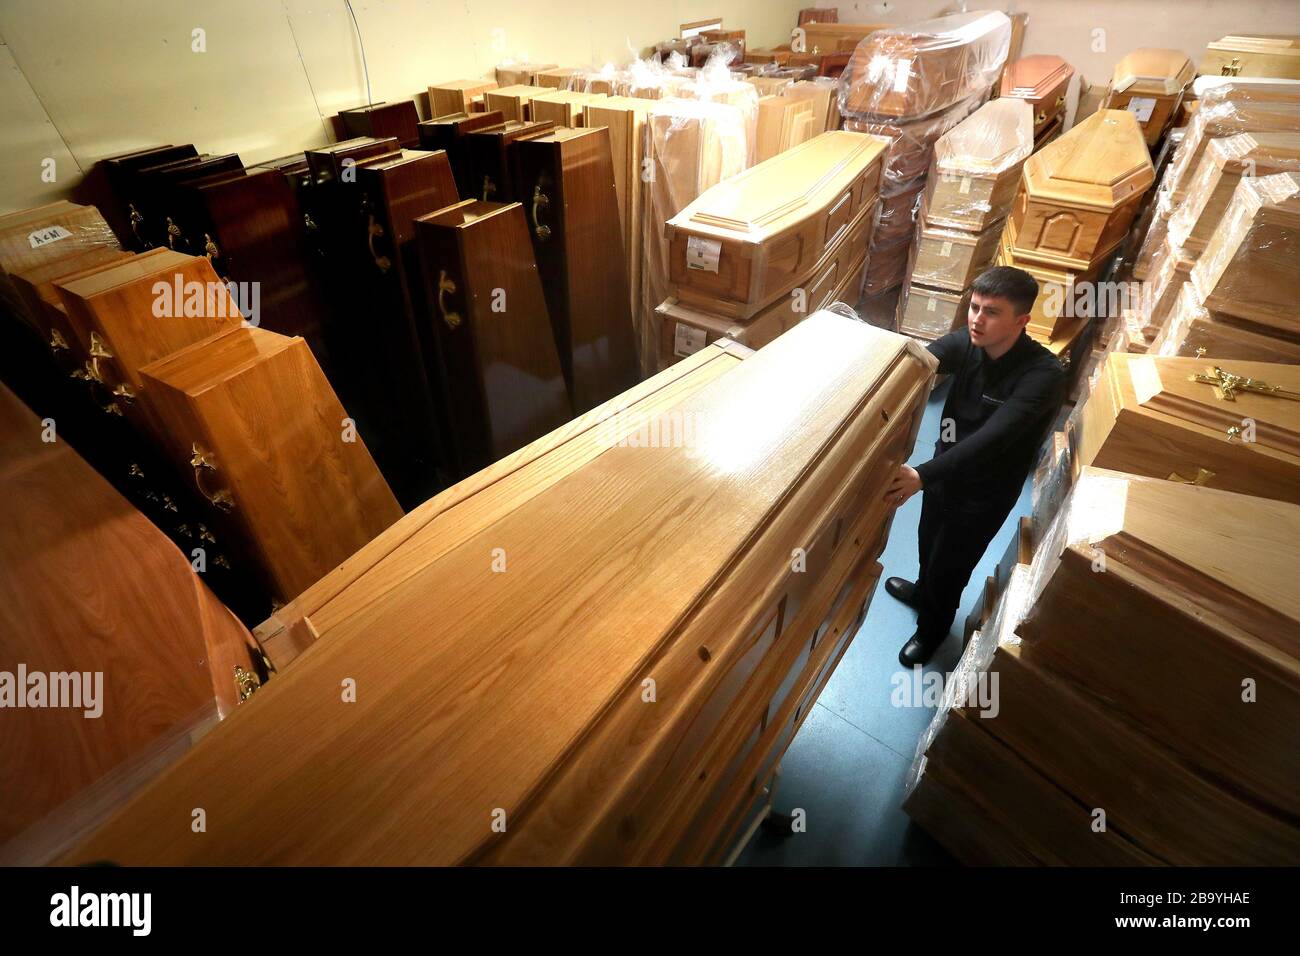 Declan Harley from Anderson Maguire Funeral Directors checks the empty coffins in the storage room at their offices in Glasgow. Funeral directors in Scotland's largest city are facing a backlog and on the verge of running out of mortuary space, the head of one family firm has said. Funerals are unable to take place until deaths have been registered and face-to-face appointments at registry offices are unavailable following coronavirus guidance. Stock Photo